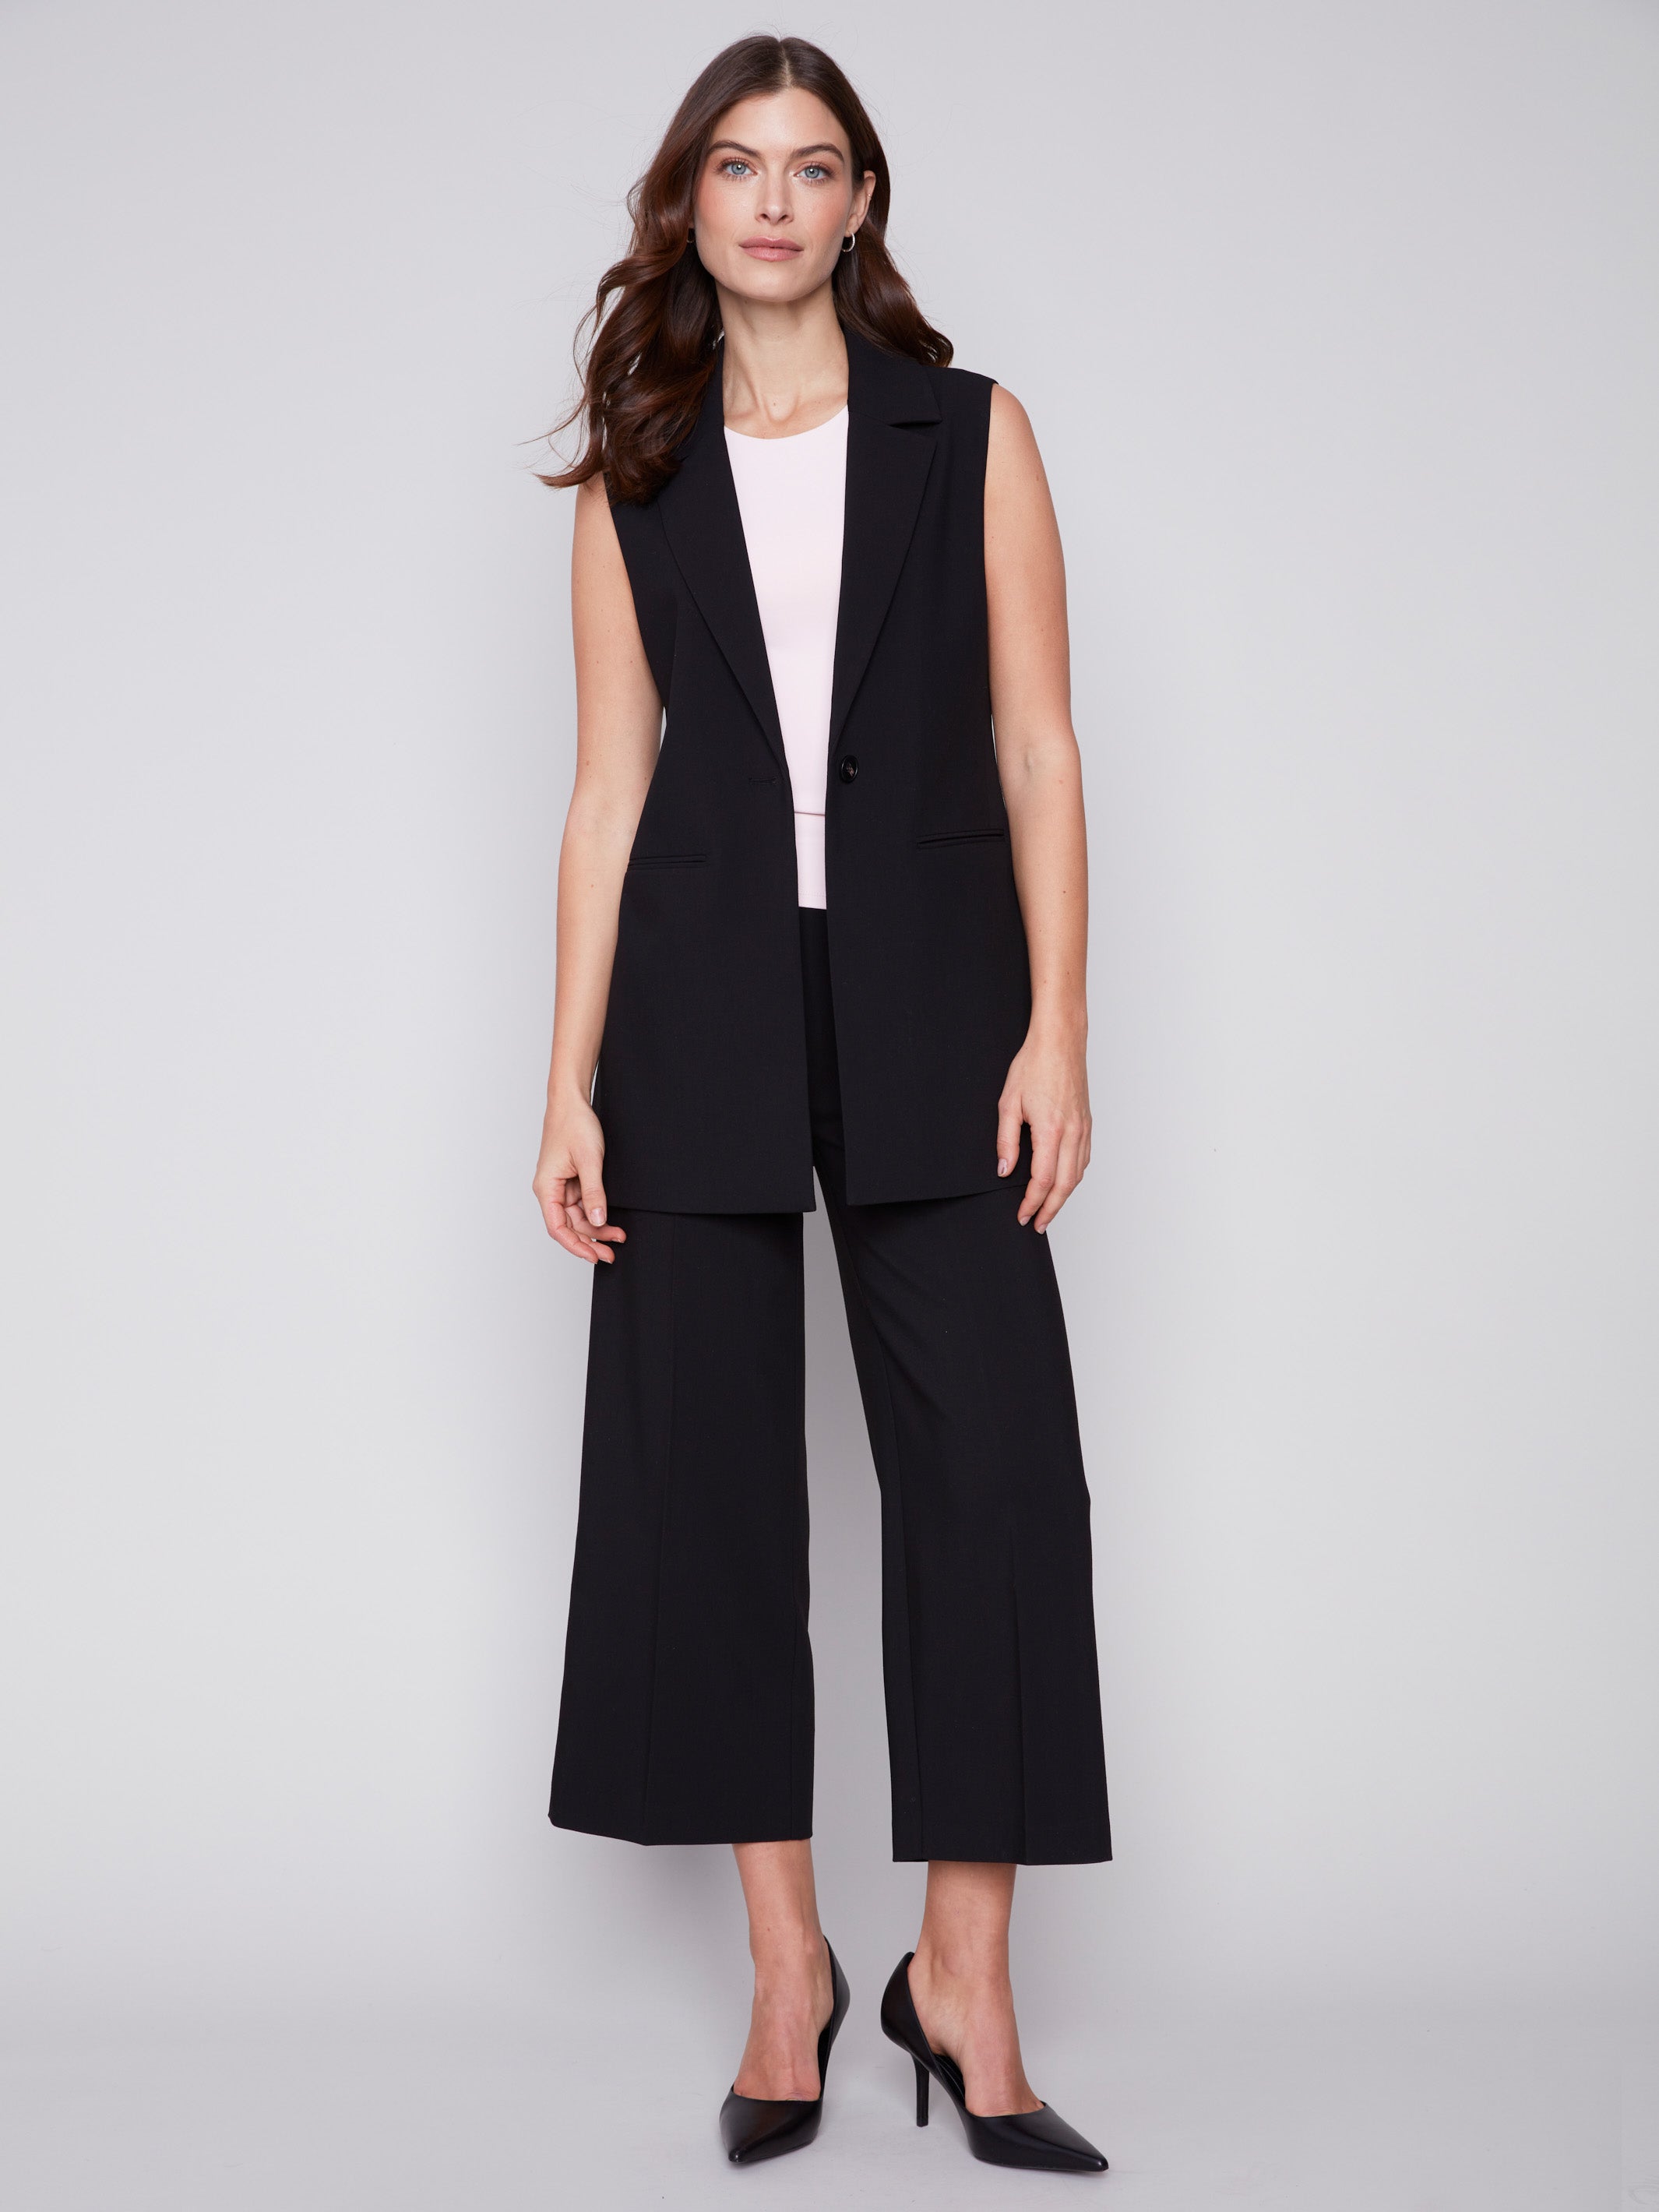 Cropped Wide Leg Pants - Black - Charlie B Collection Canada - Image 4